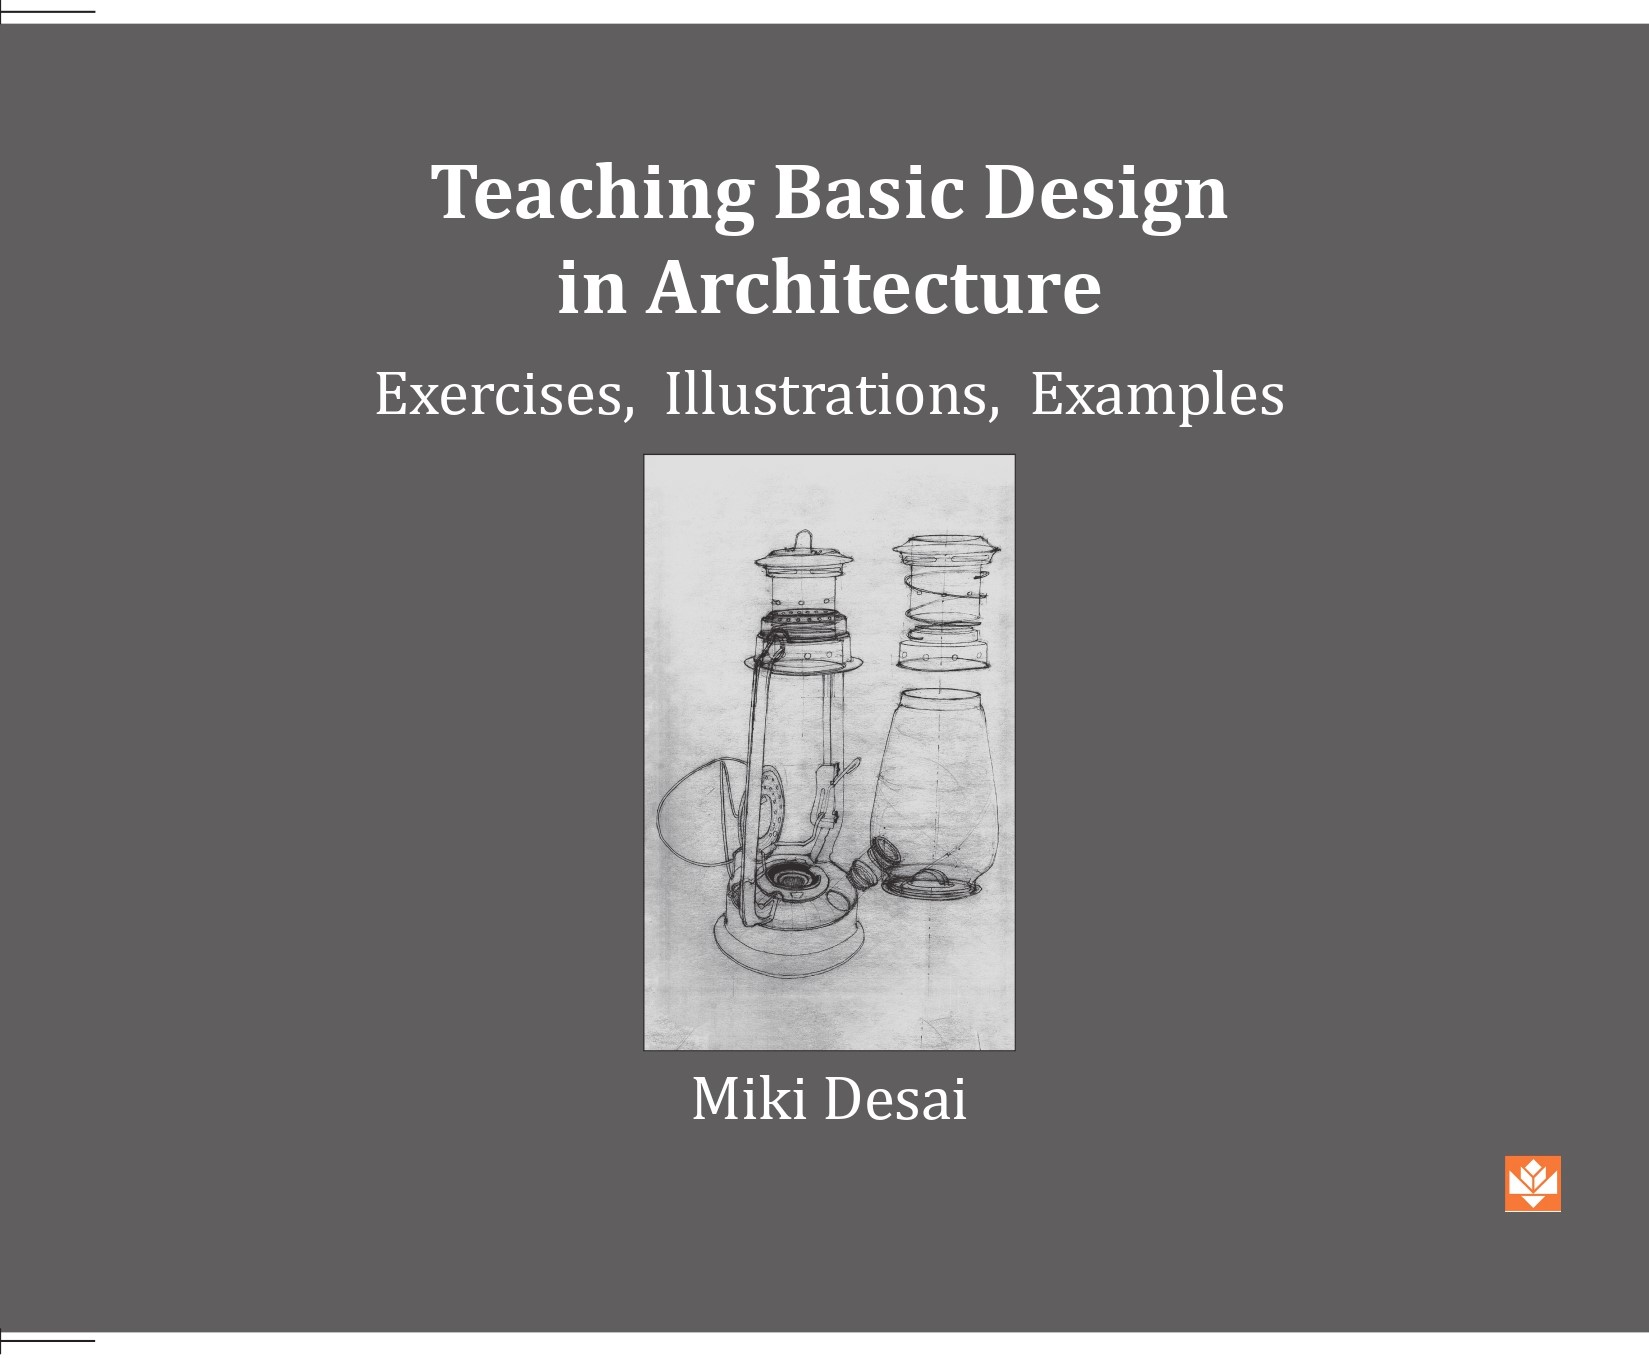 Book: Teaching Basic Design in Architecture: Exercises, Illustrations, Examples, by Miki Desai 1